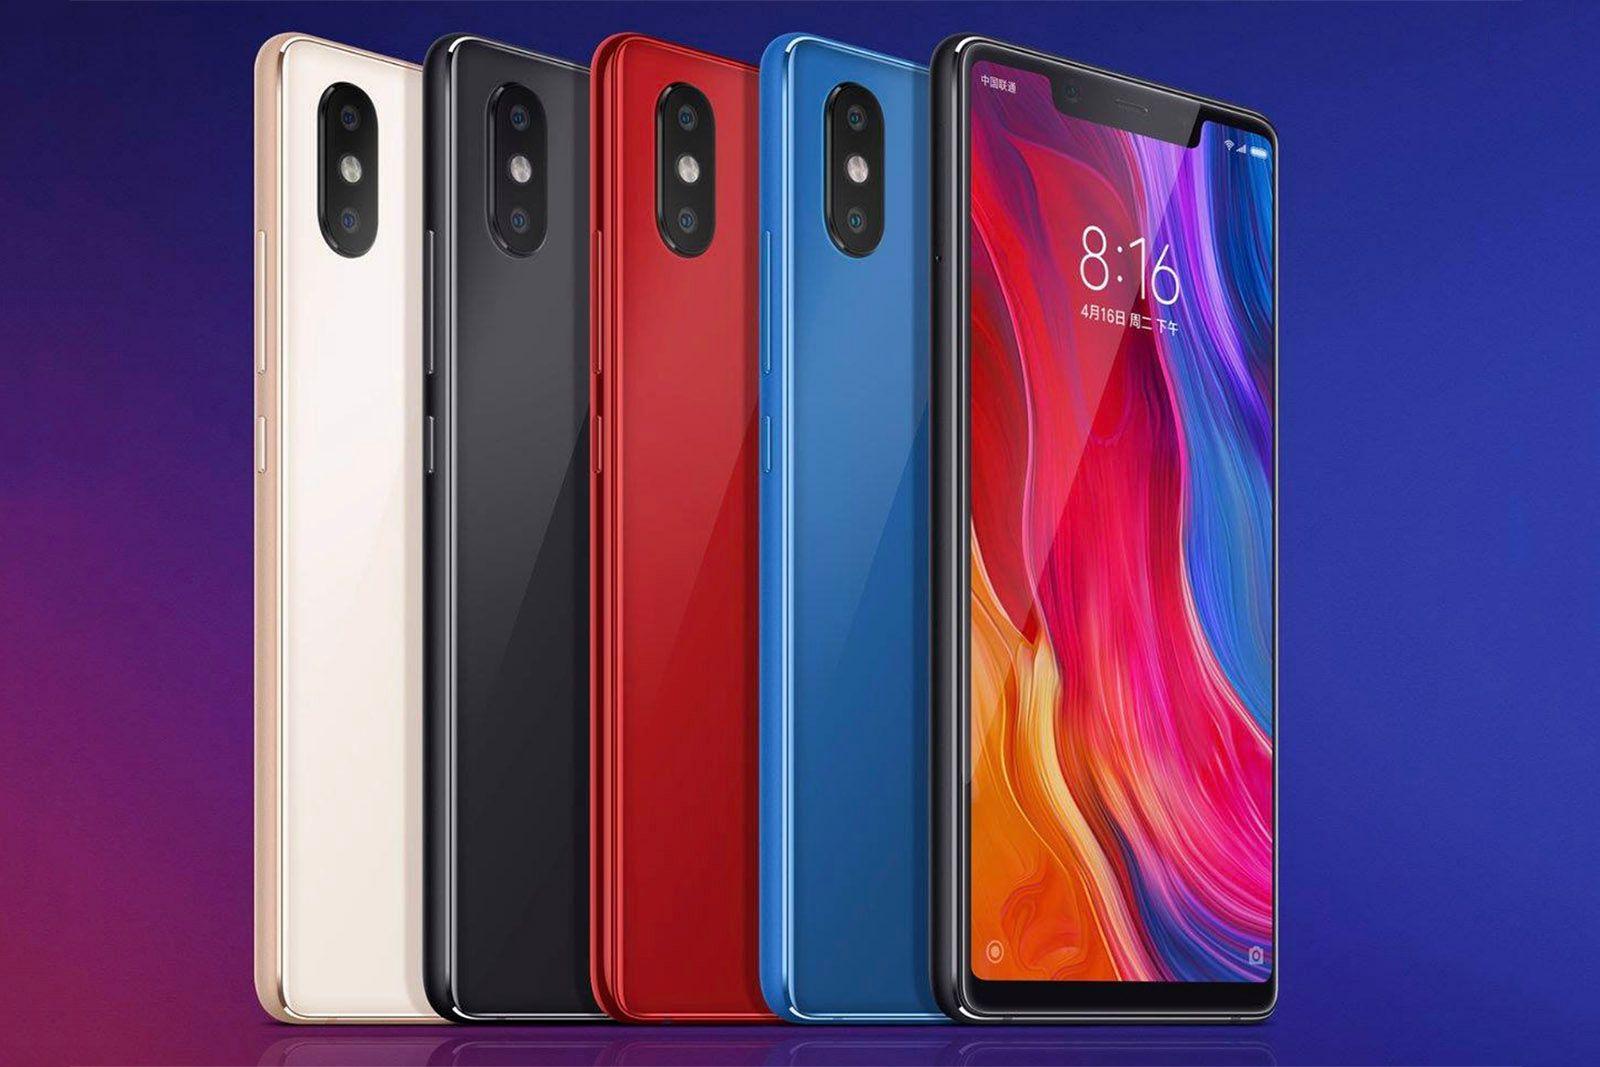 Xiaomi Mi 8 Is A 61-inch Monster With Iphone X Looks And Dual-frequency Gps image 2